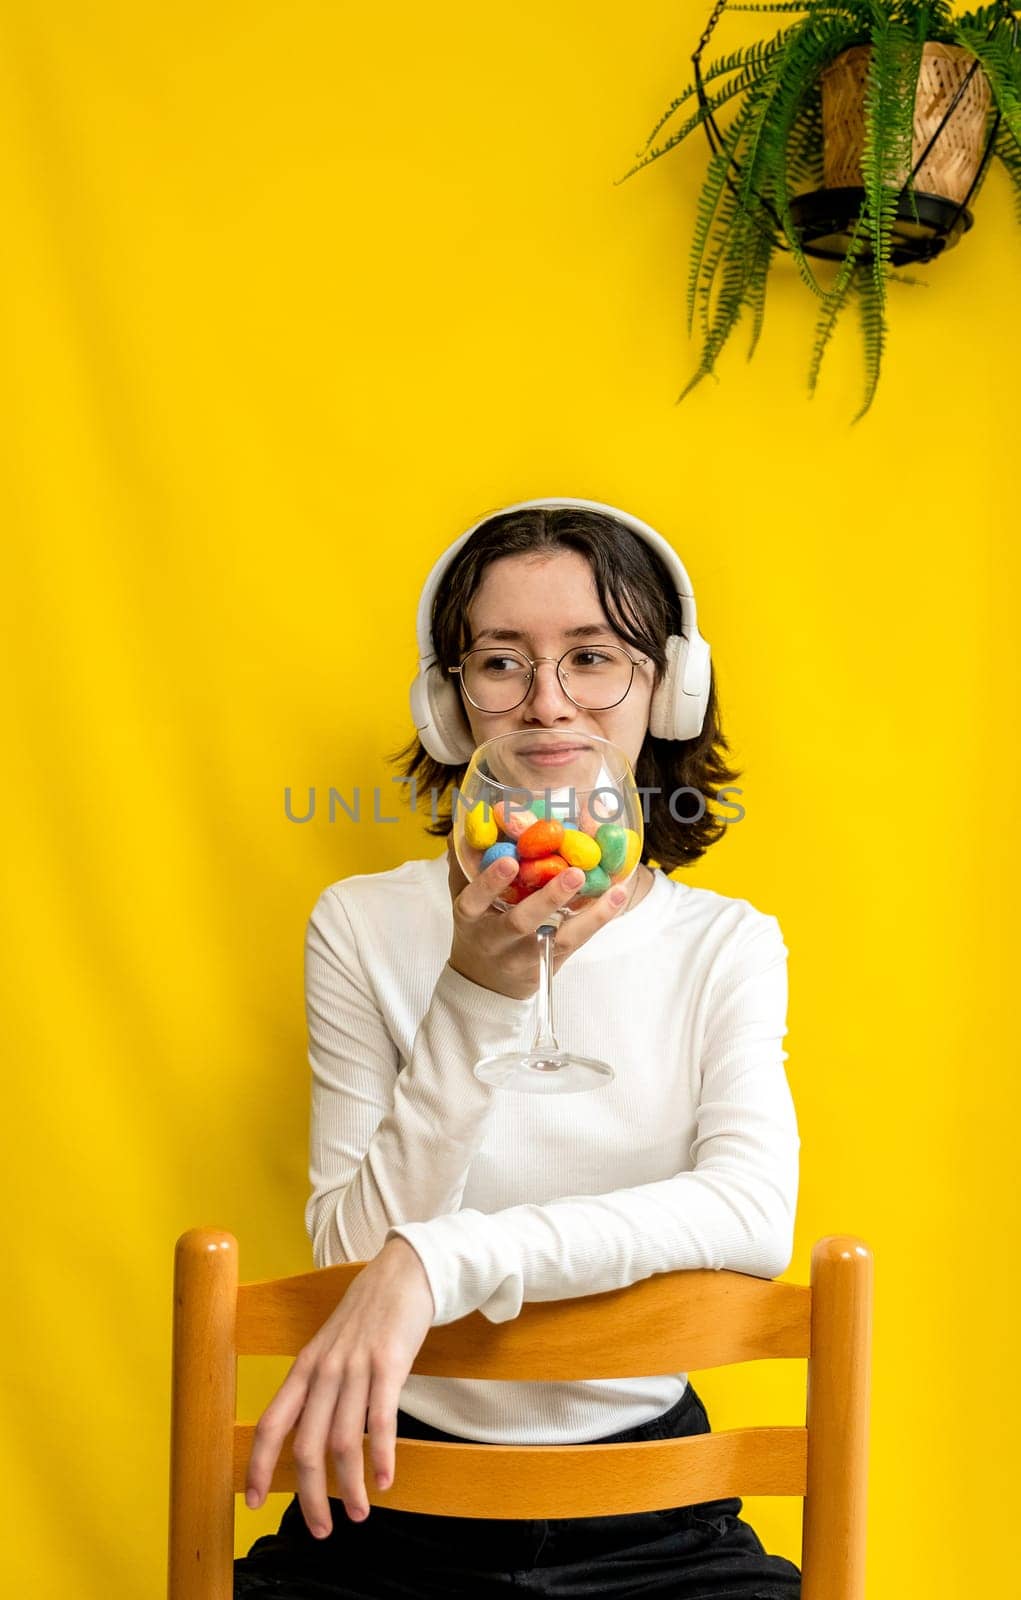 Portrait of one young Caucasian beautiful happy teenage girl in glasses and headphones holds a wine glass with Easter marble decorative eggs at her mouth, sitting on a chair on a yellow background with a hanging palm flower on a spring day in the room and looks to the side, side view close-up.